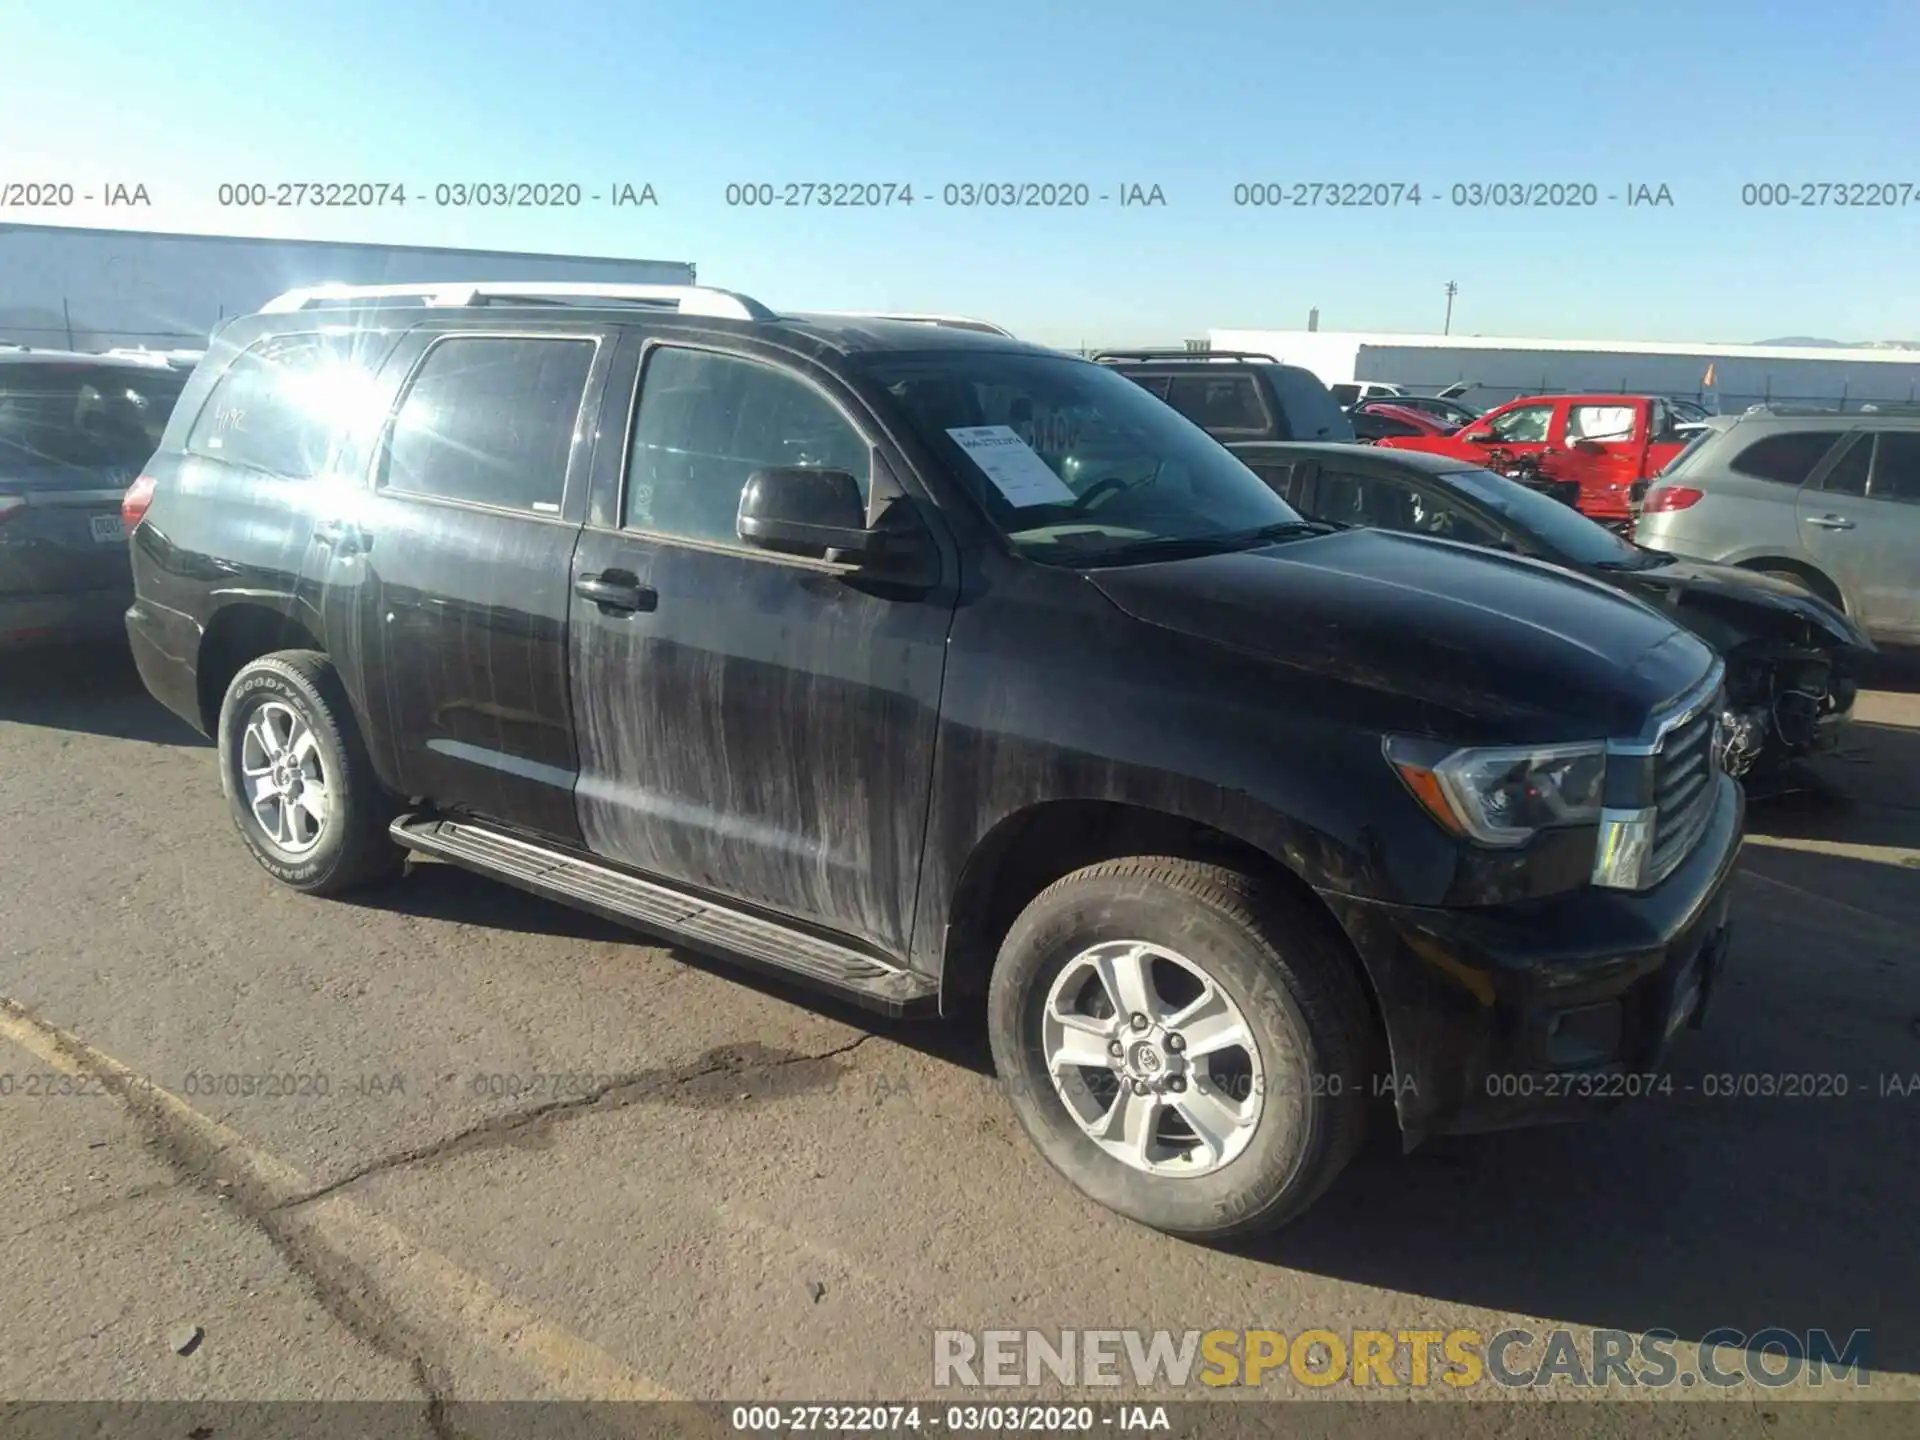 1 Photograph of a damaged car 5TDBY5G17KS168716 TOYOTA SEQUOIA 2019